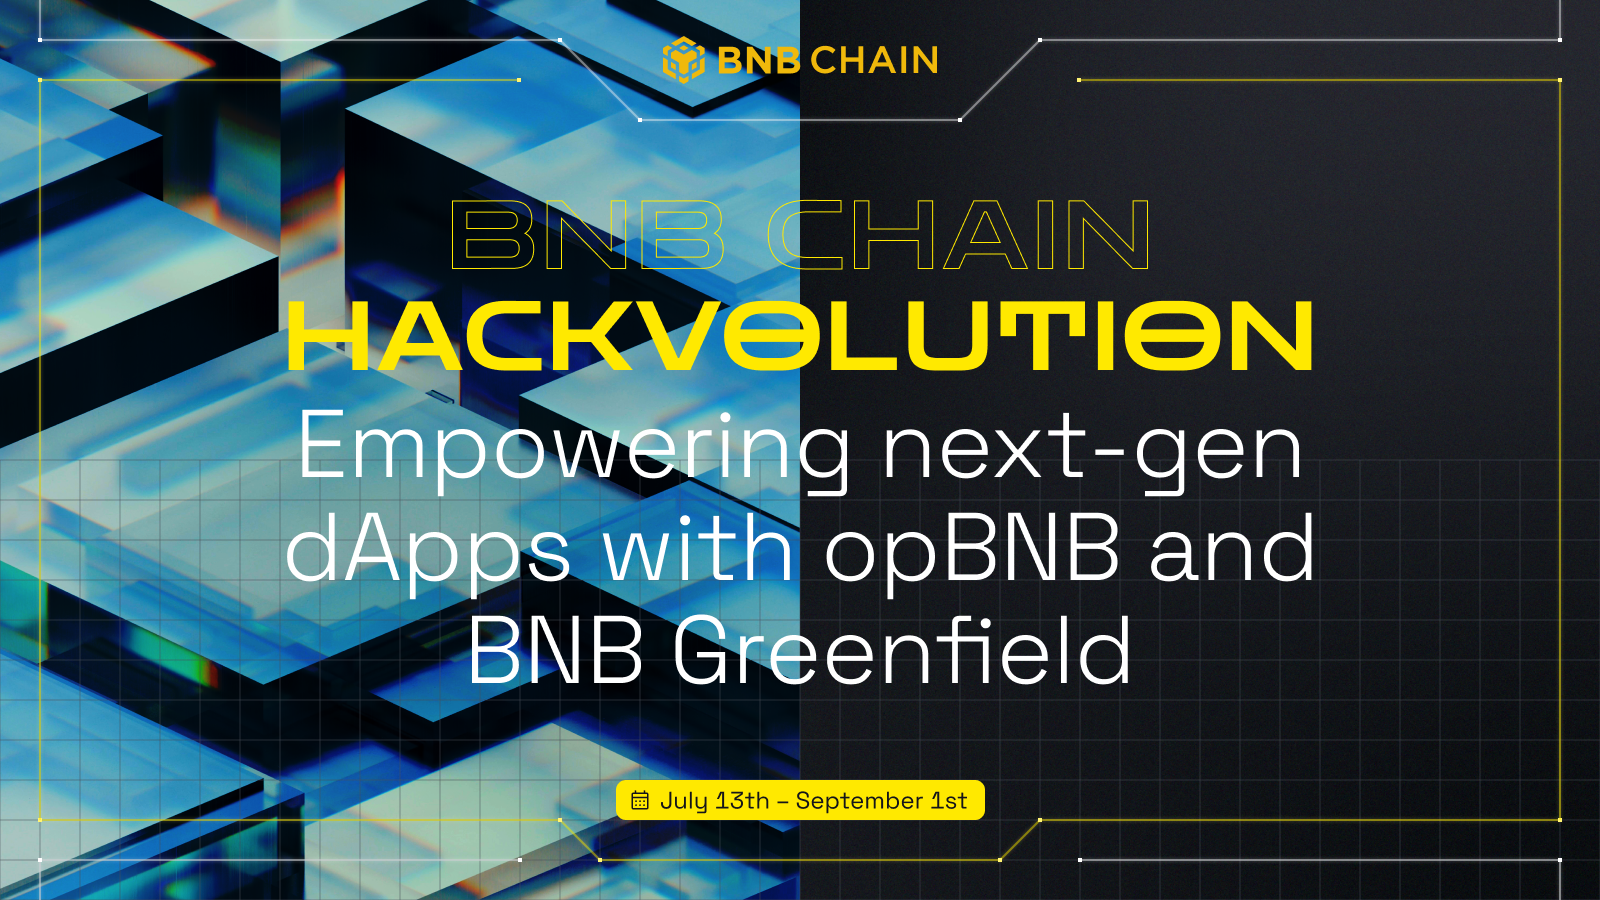 BNB Chain Hackvolution: Empowering Next-Gen dApps with opBNB and BNB Greenfield